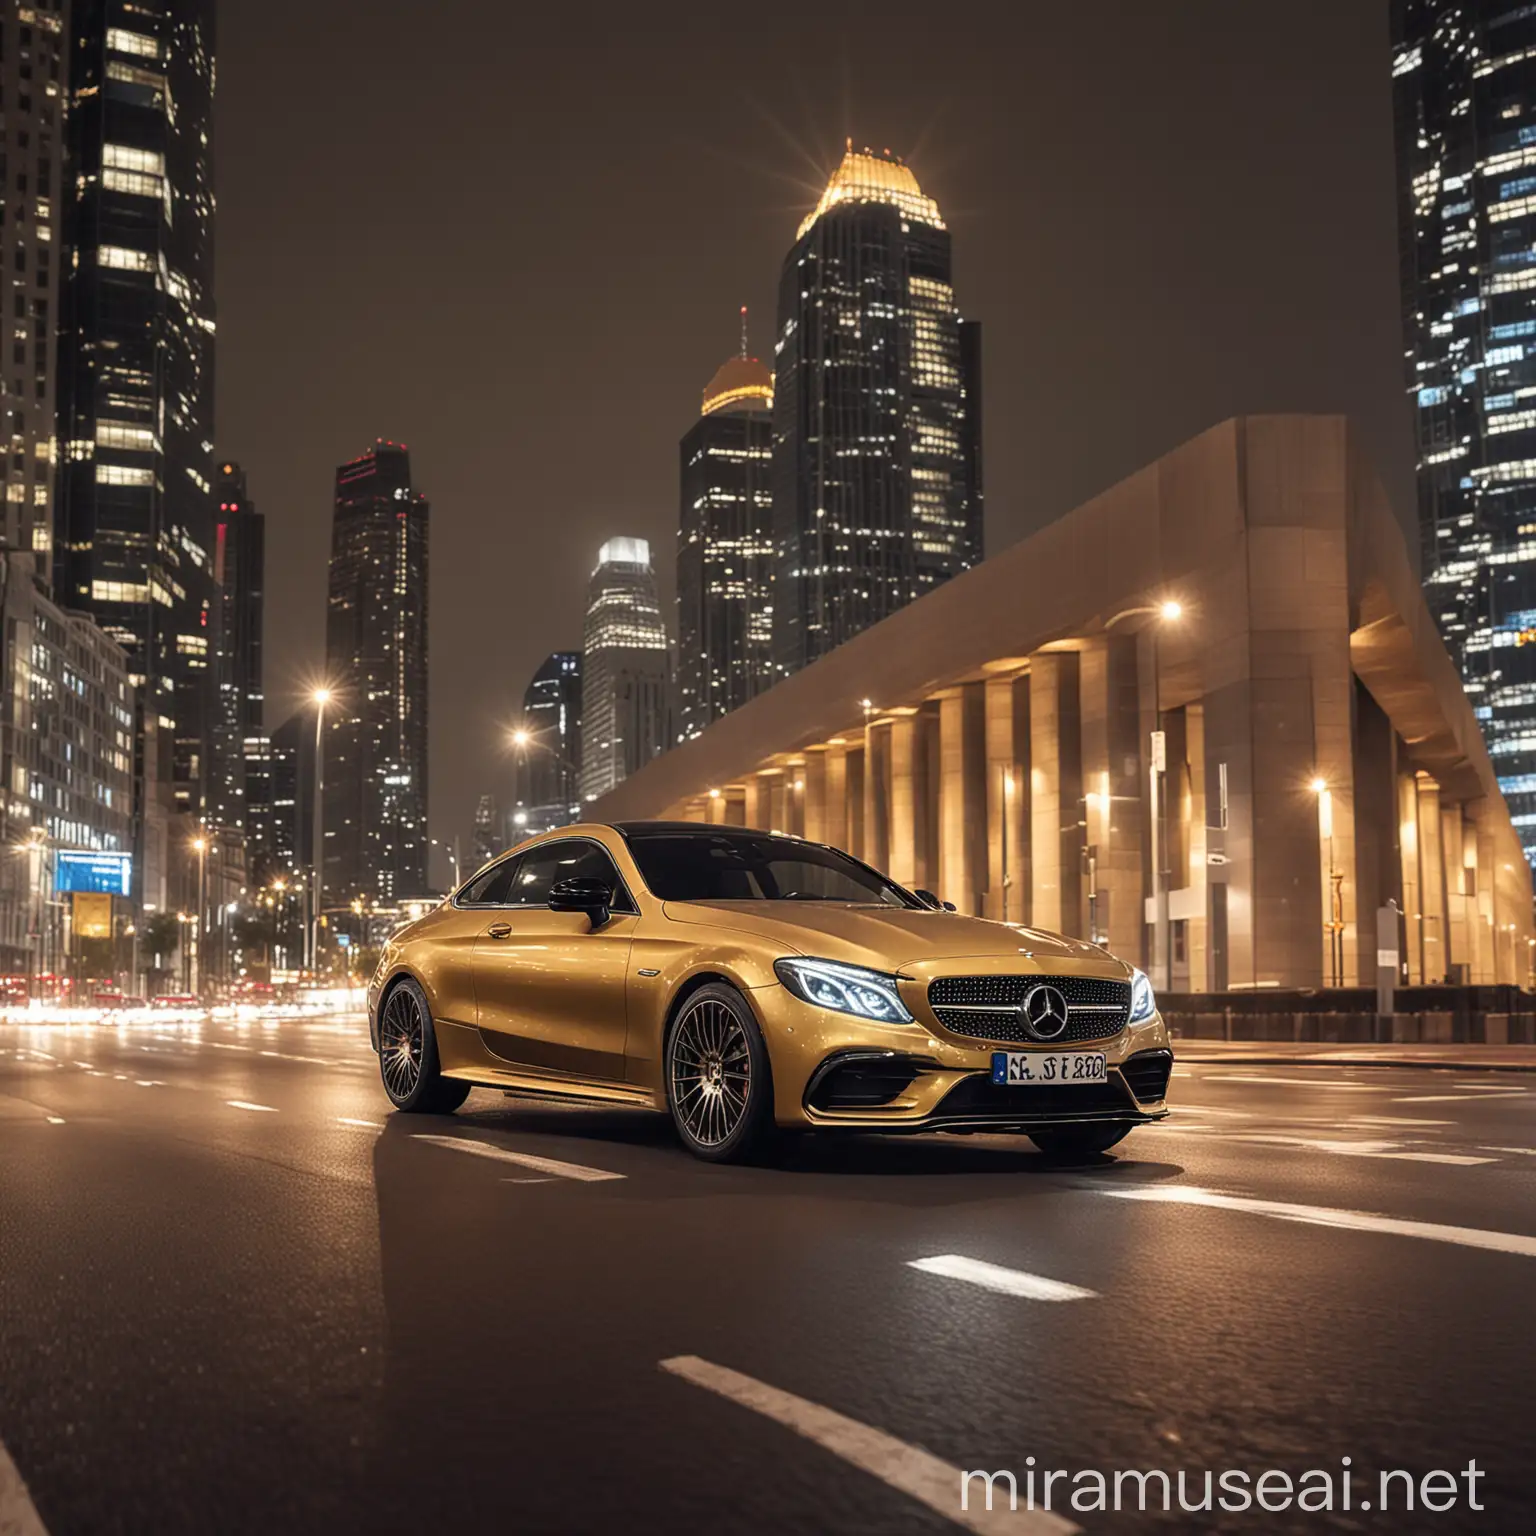 golden almost silver mercedes-benz class c coupè model going fast on the road in a night city metropolis enviroment, with skyscrapers and colored lights